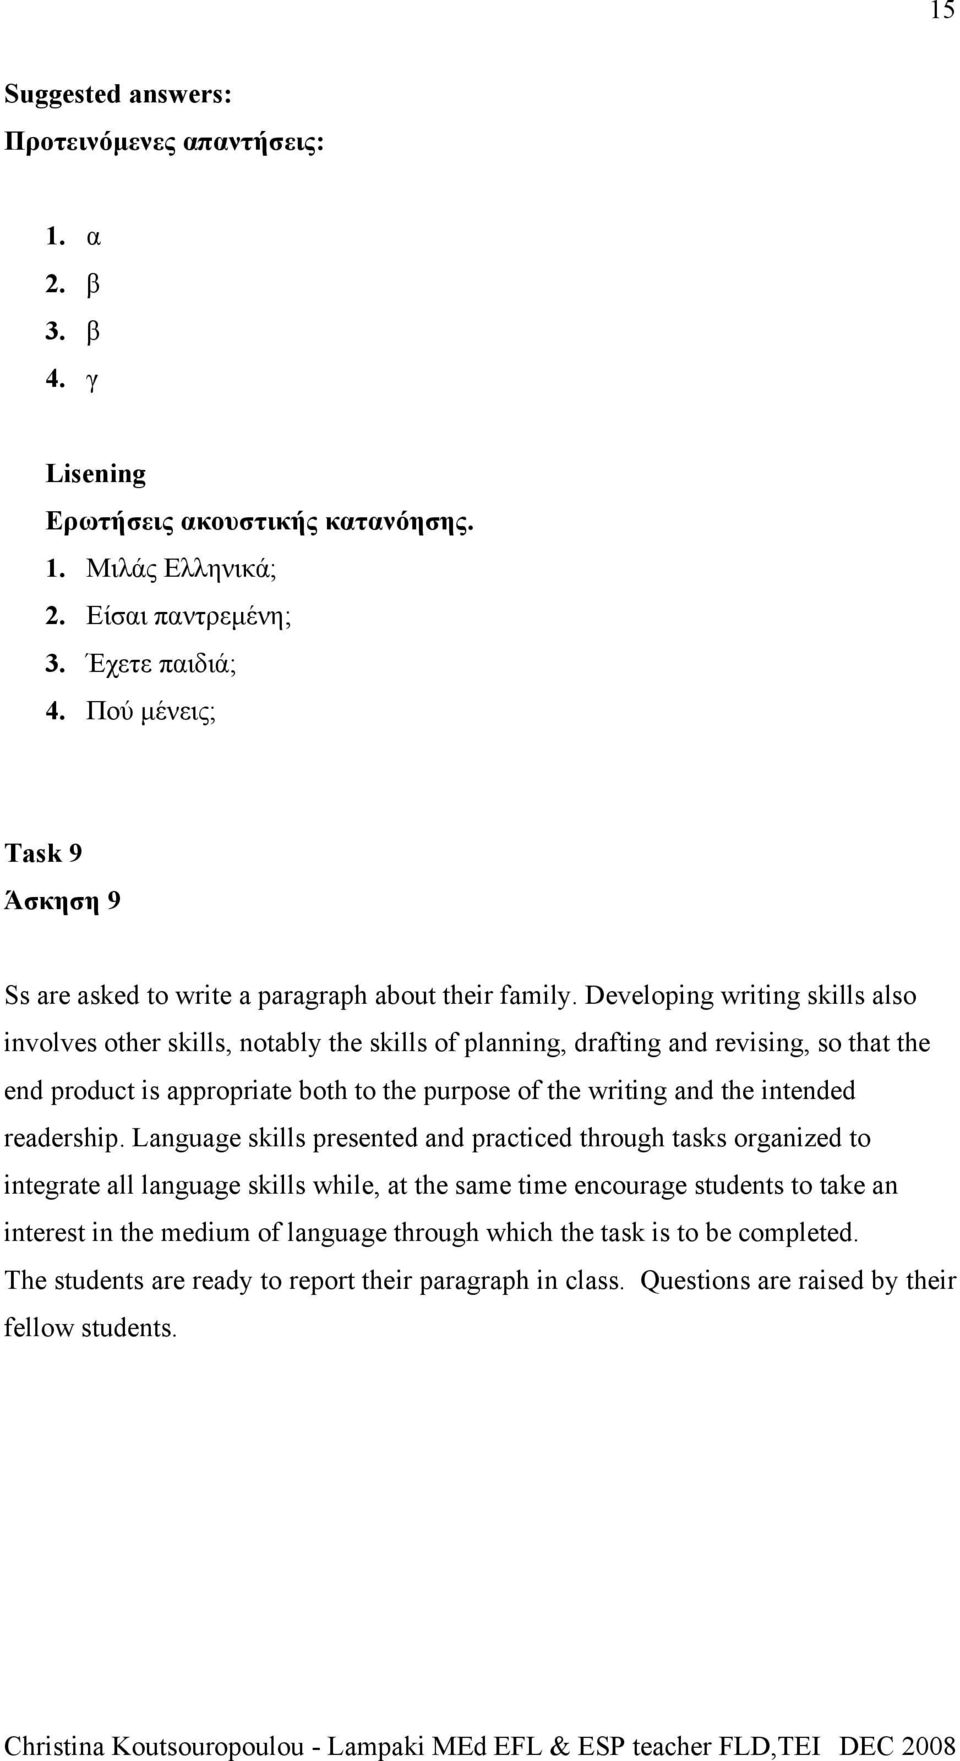 Developing writing skills also involves other skills, notably the skills of planning, drafting and revising, so that the end product is appropriate both to the purpose of the writing and the intended